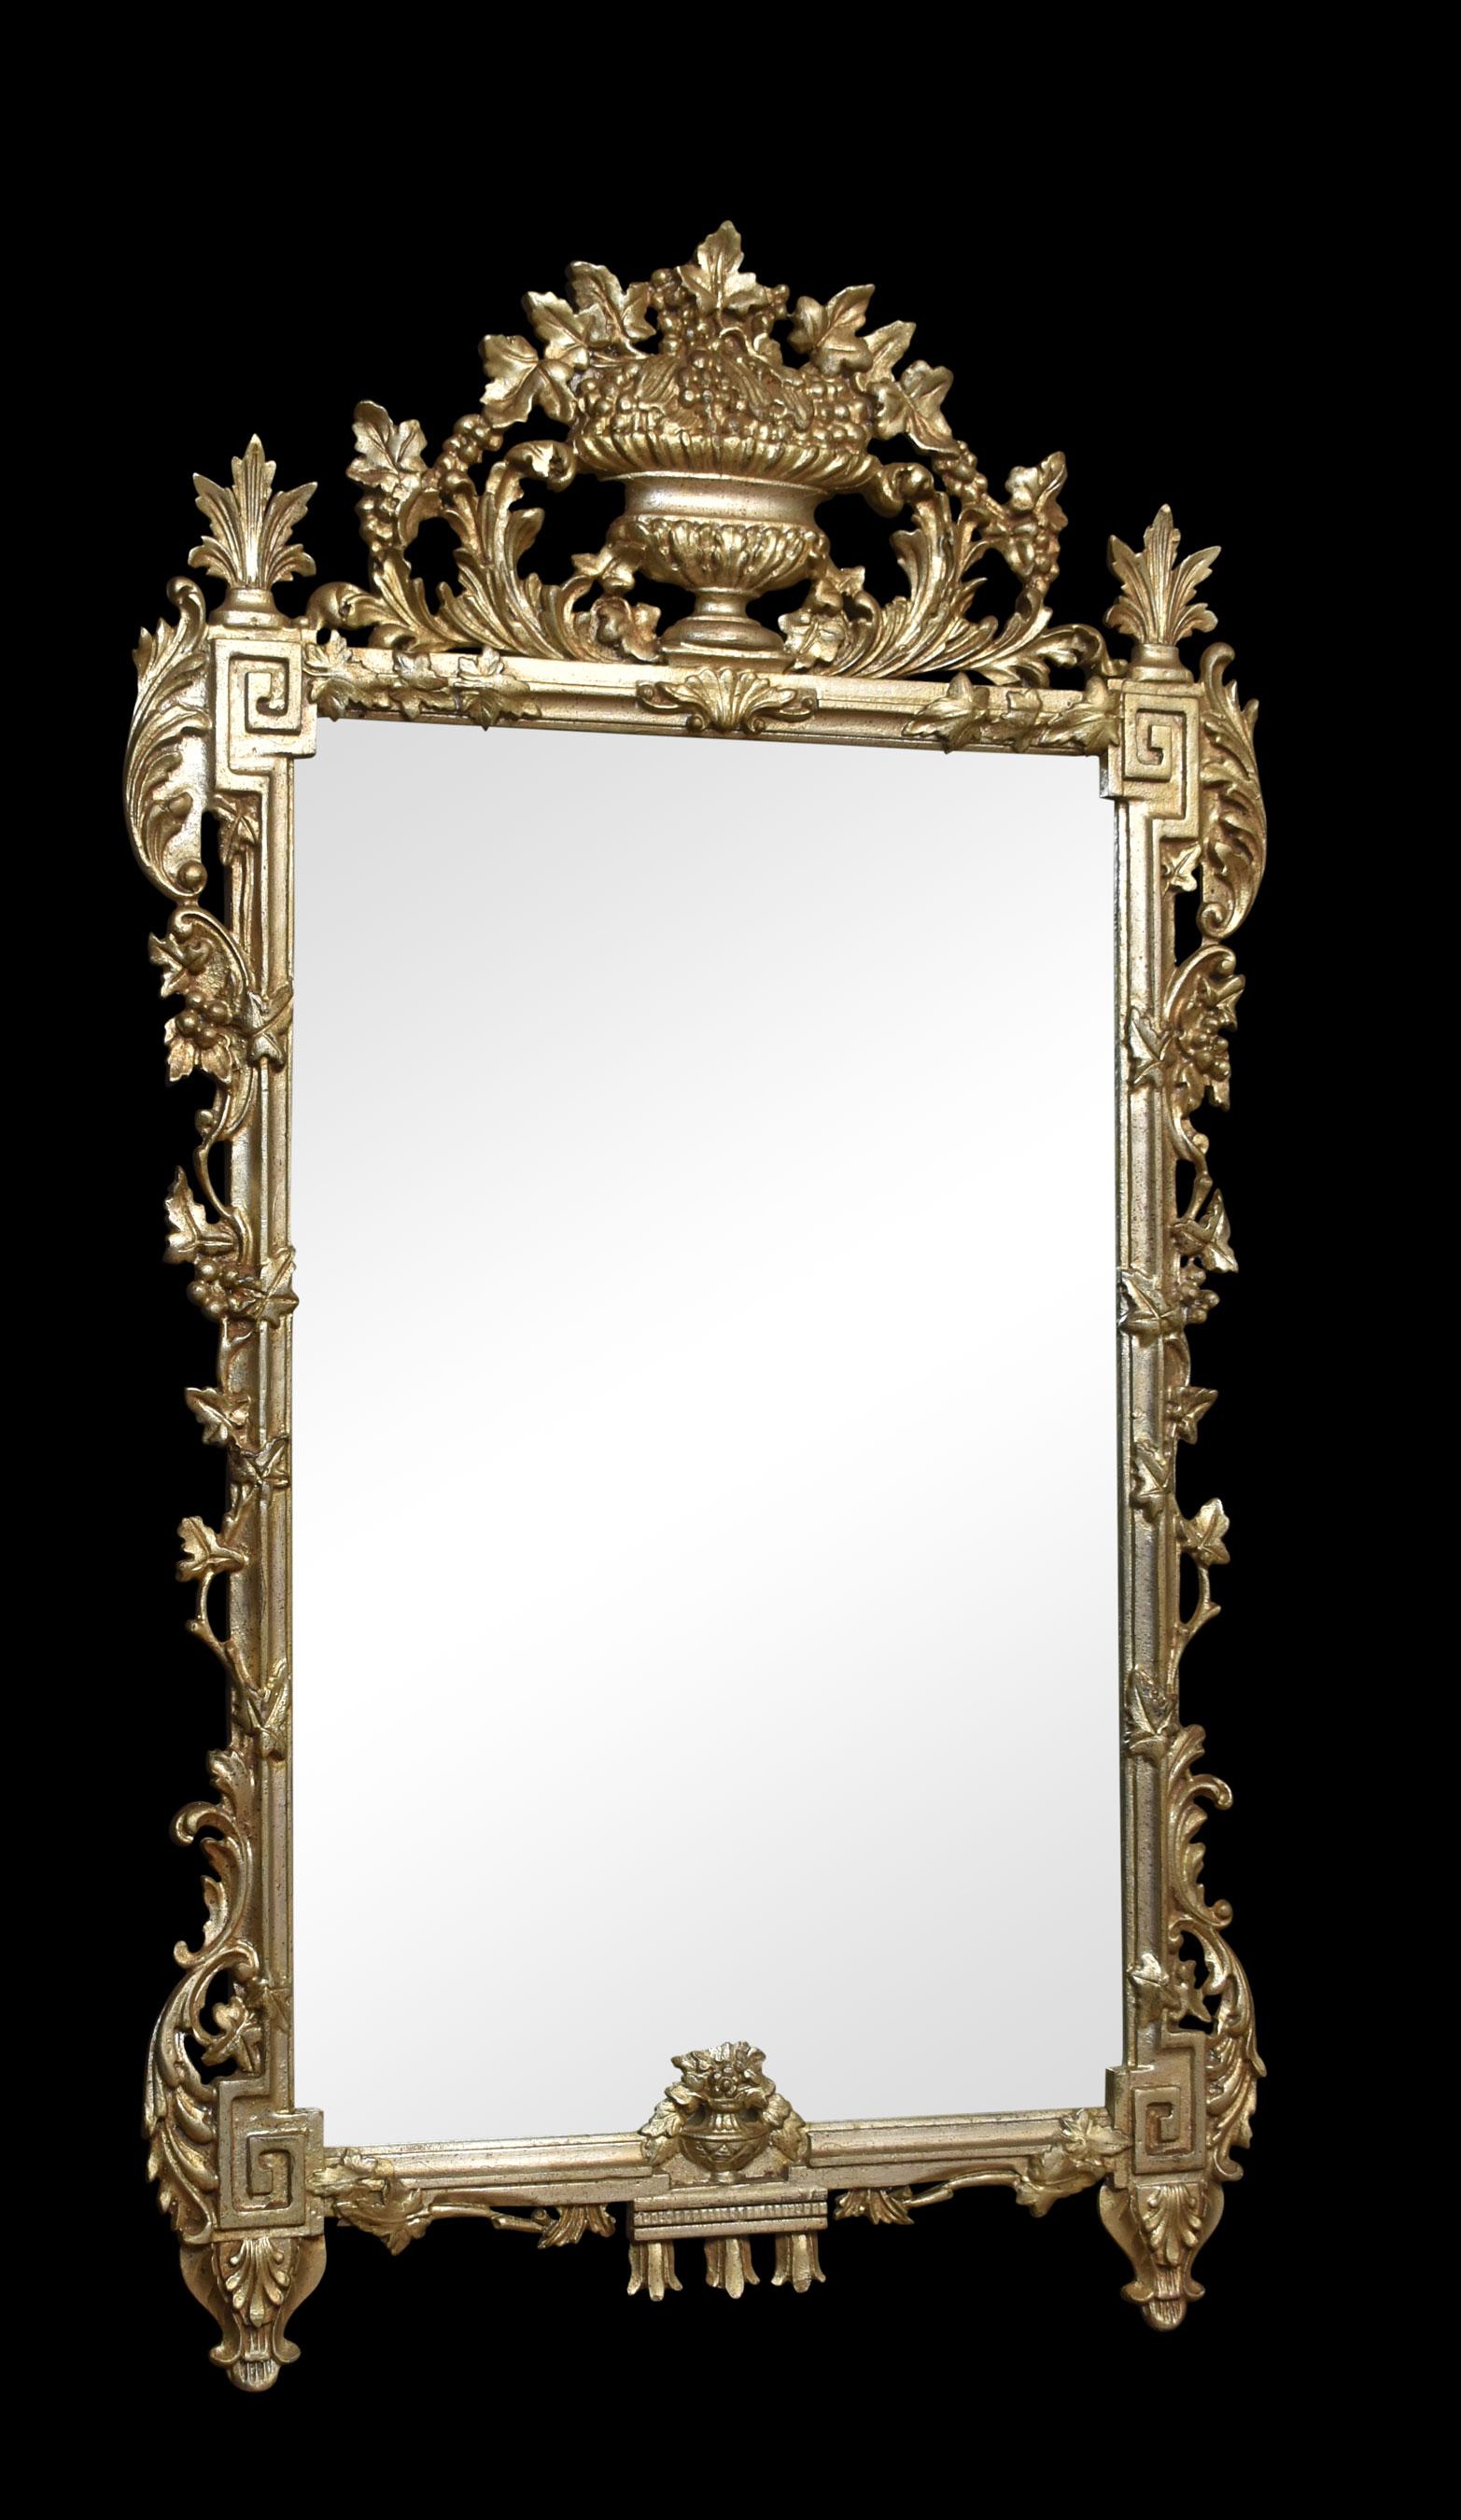 British 18th Century Venetian-Style Silvered Wall Mirror For Sale